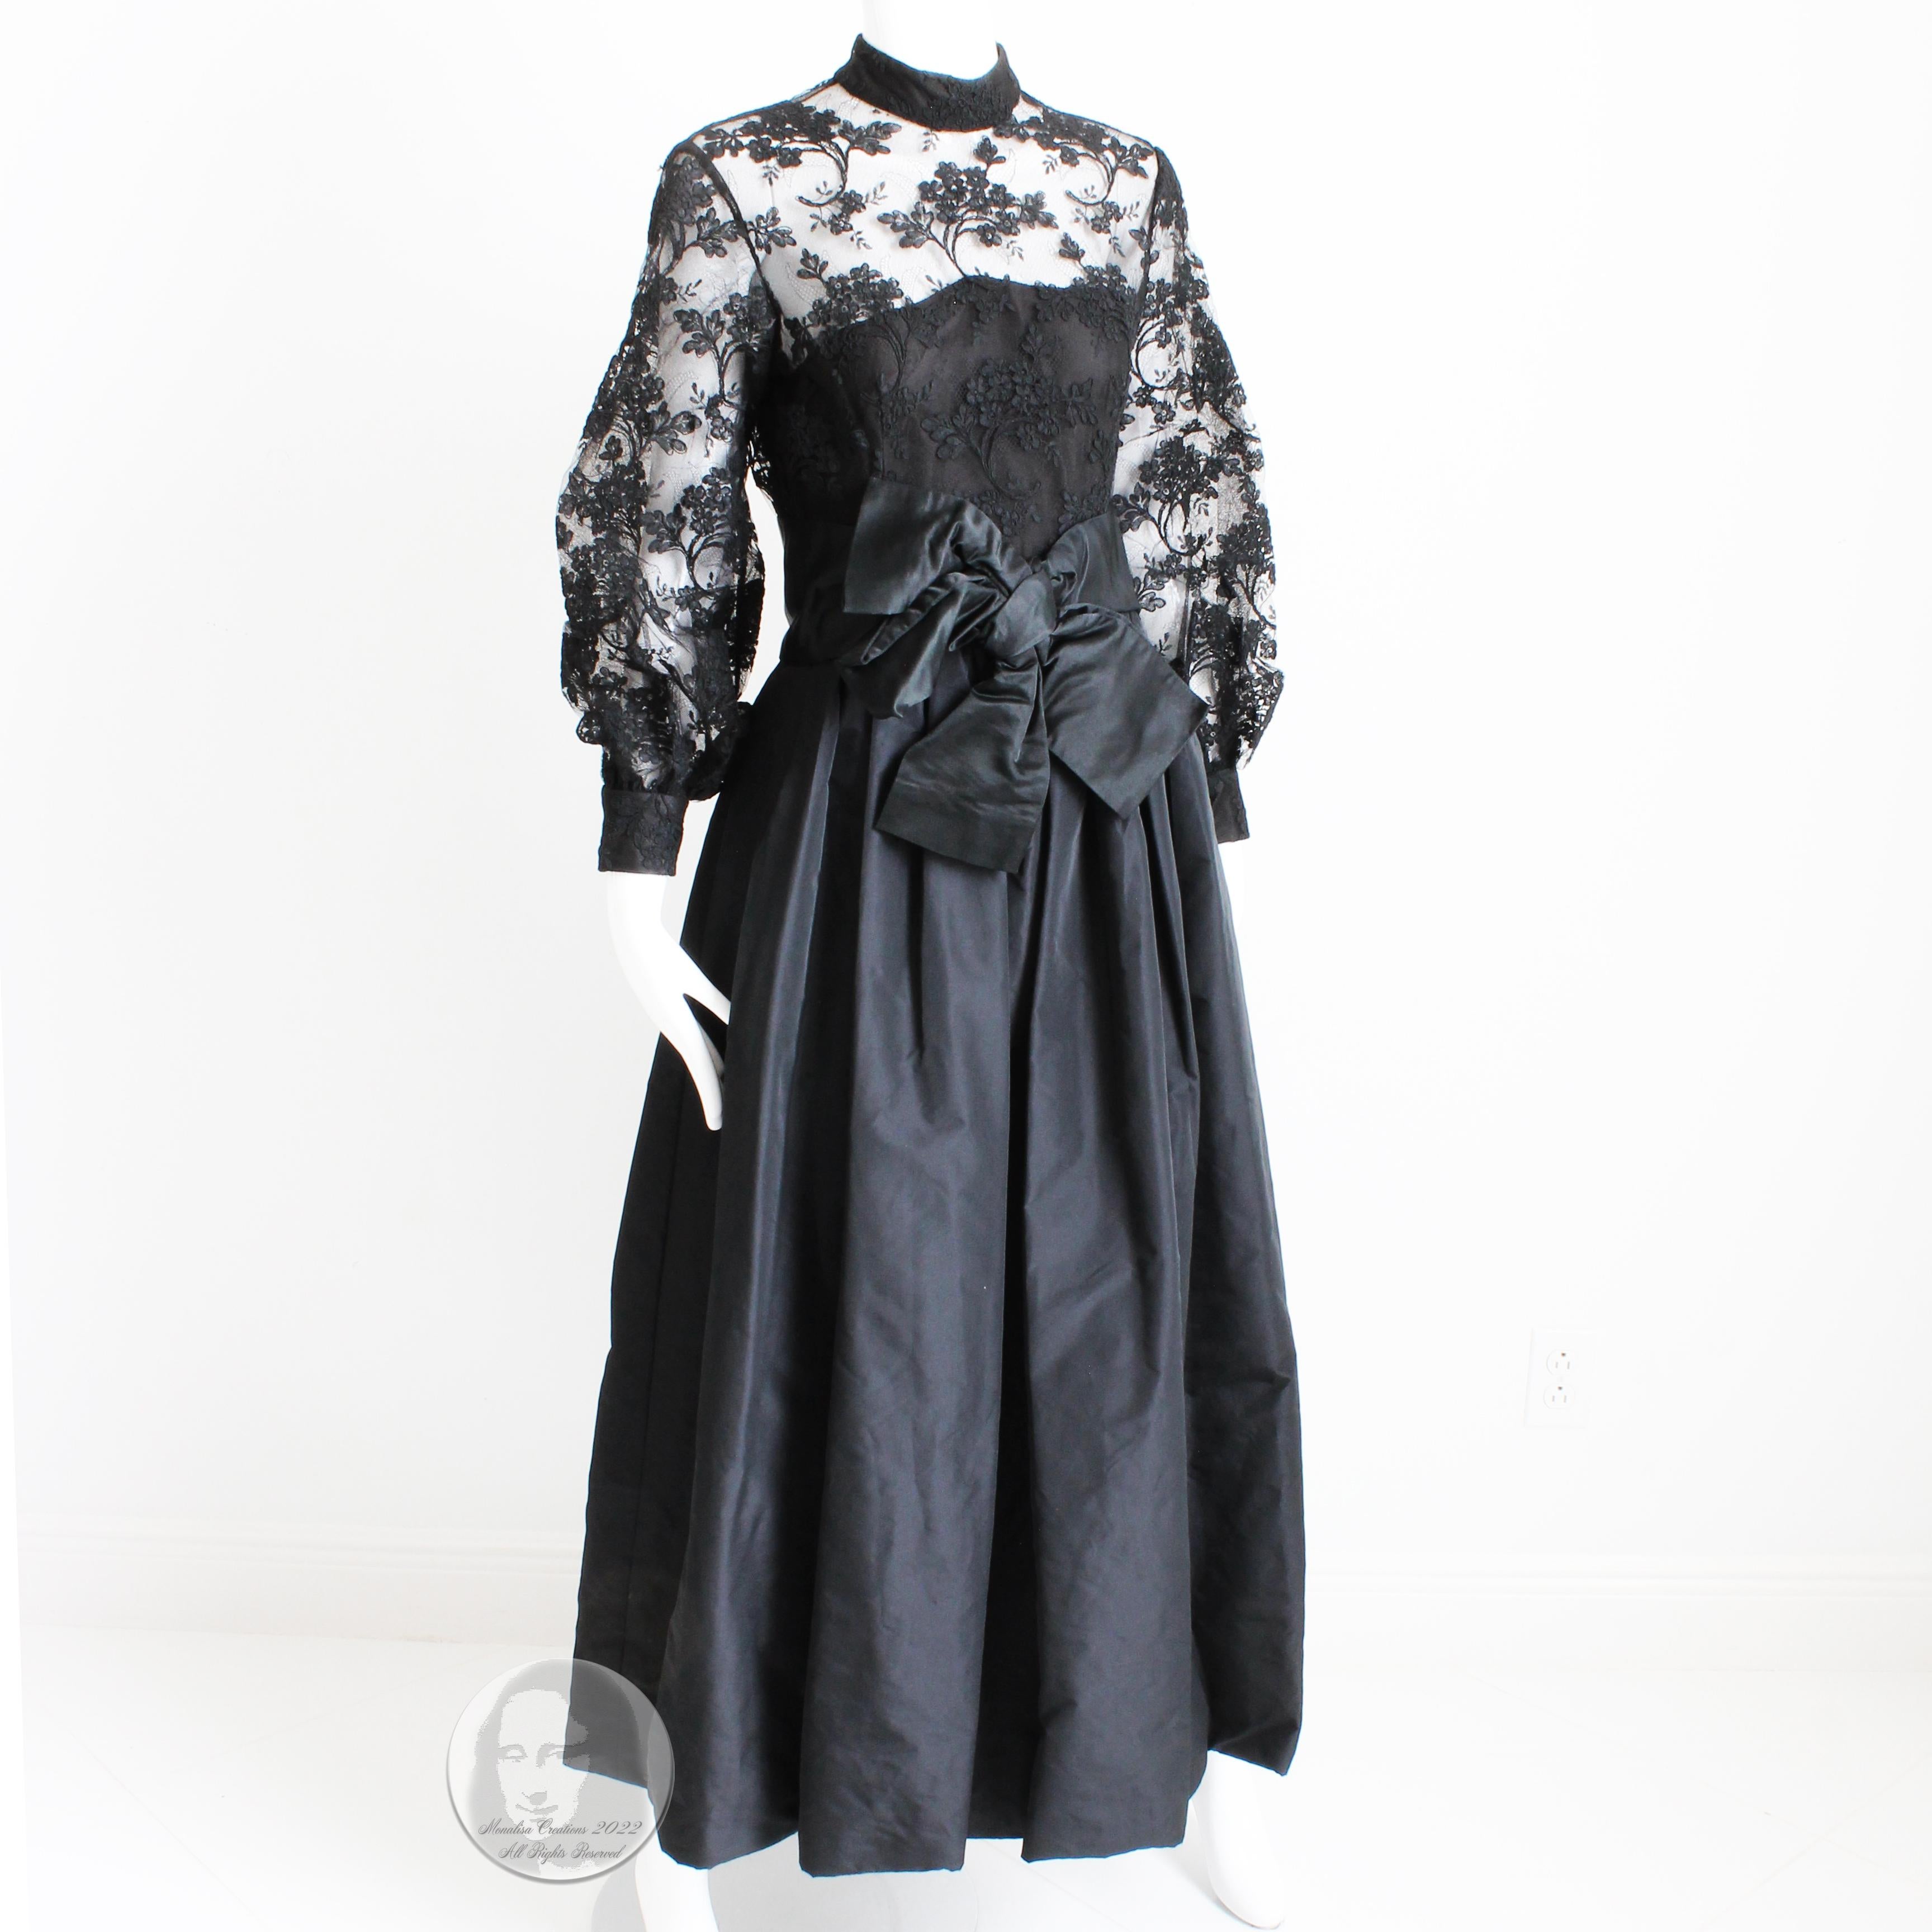 This black lace and taffeta evening gown was made by Ronald Amey in the 1970s and is absolutely gorgeous.  The bodice features black floral lace with netting underneath, and the the darted skirt is made from what appears to be a black silk taffeta